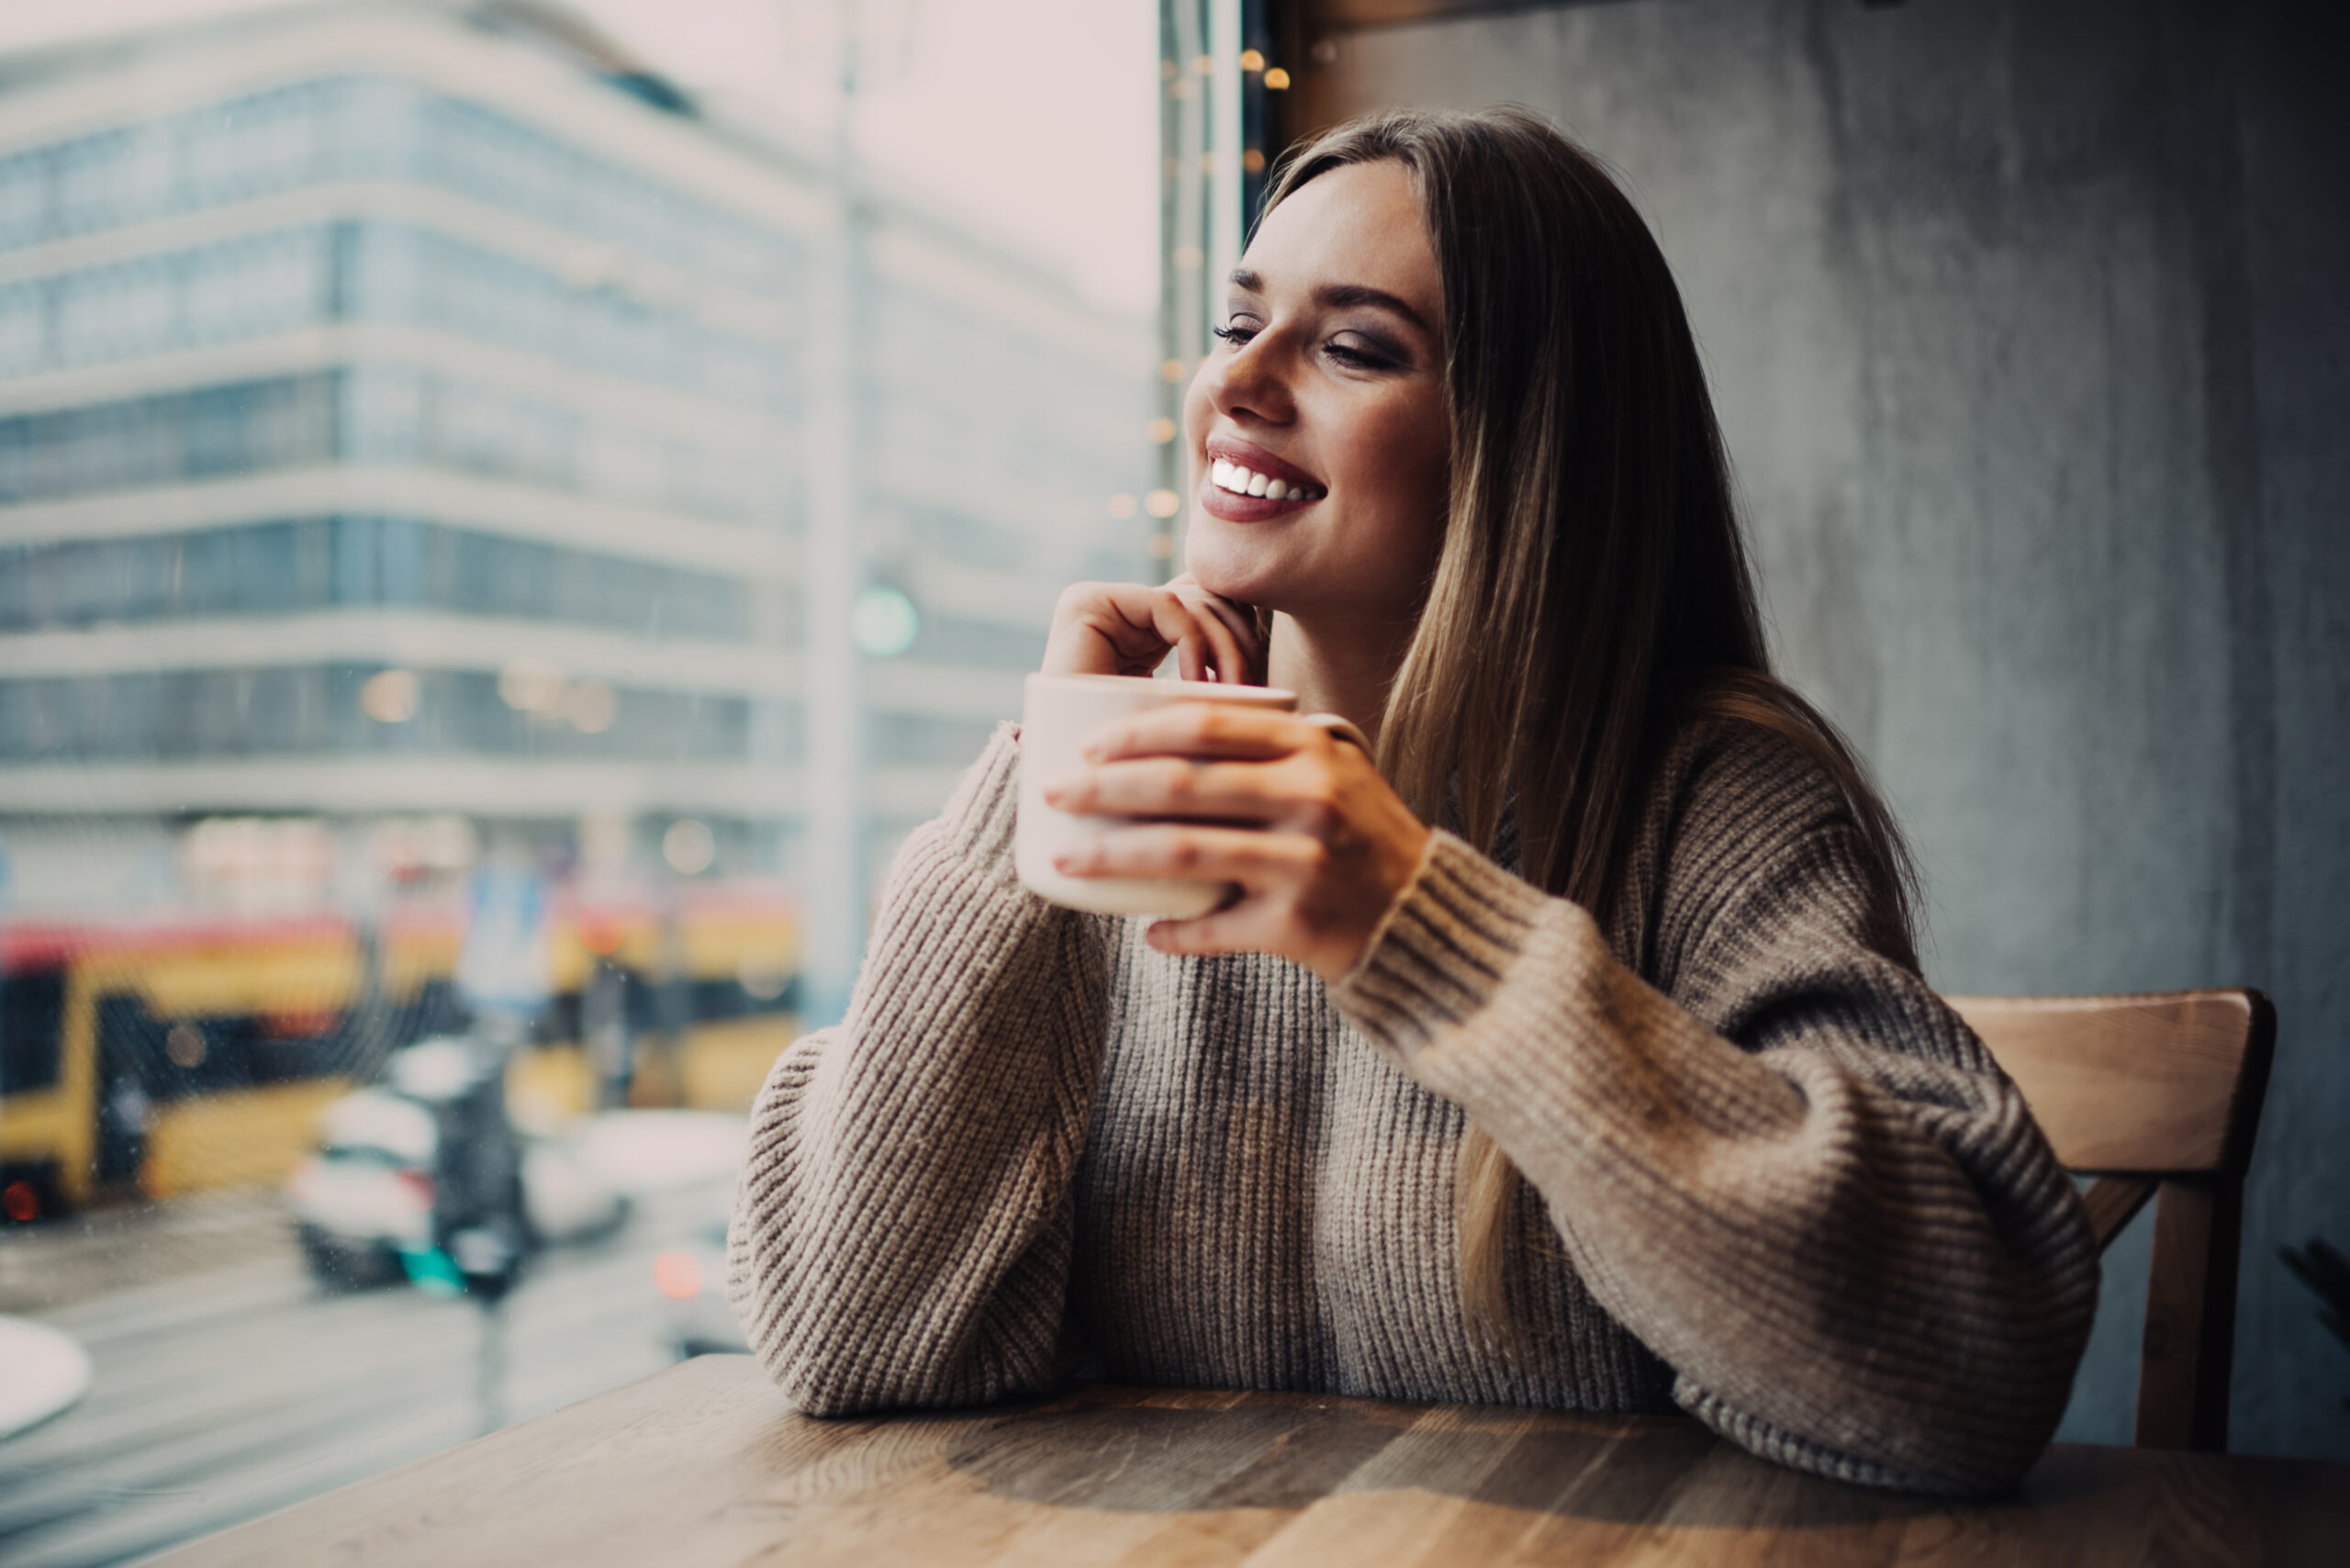 Cheerful hipster girl 20s with perfect veneers laughing during resting time in cafe interior, sincerely female customer with tea cup for warming smiling during cafeteria recreation on weekend